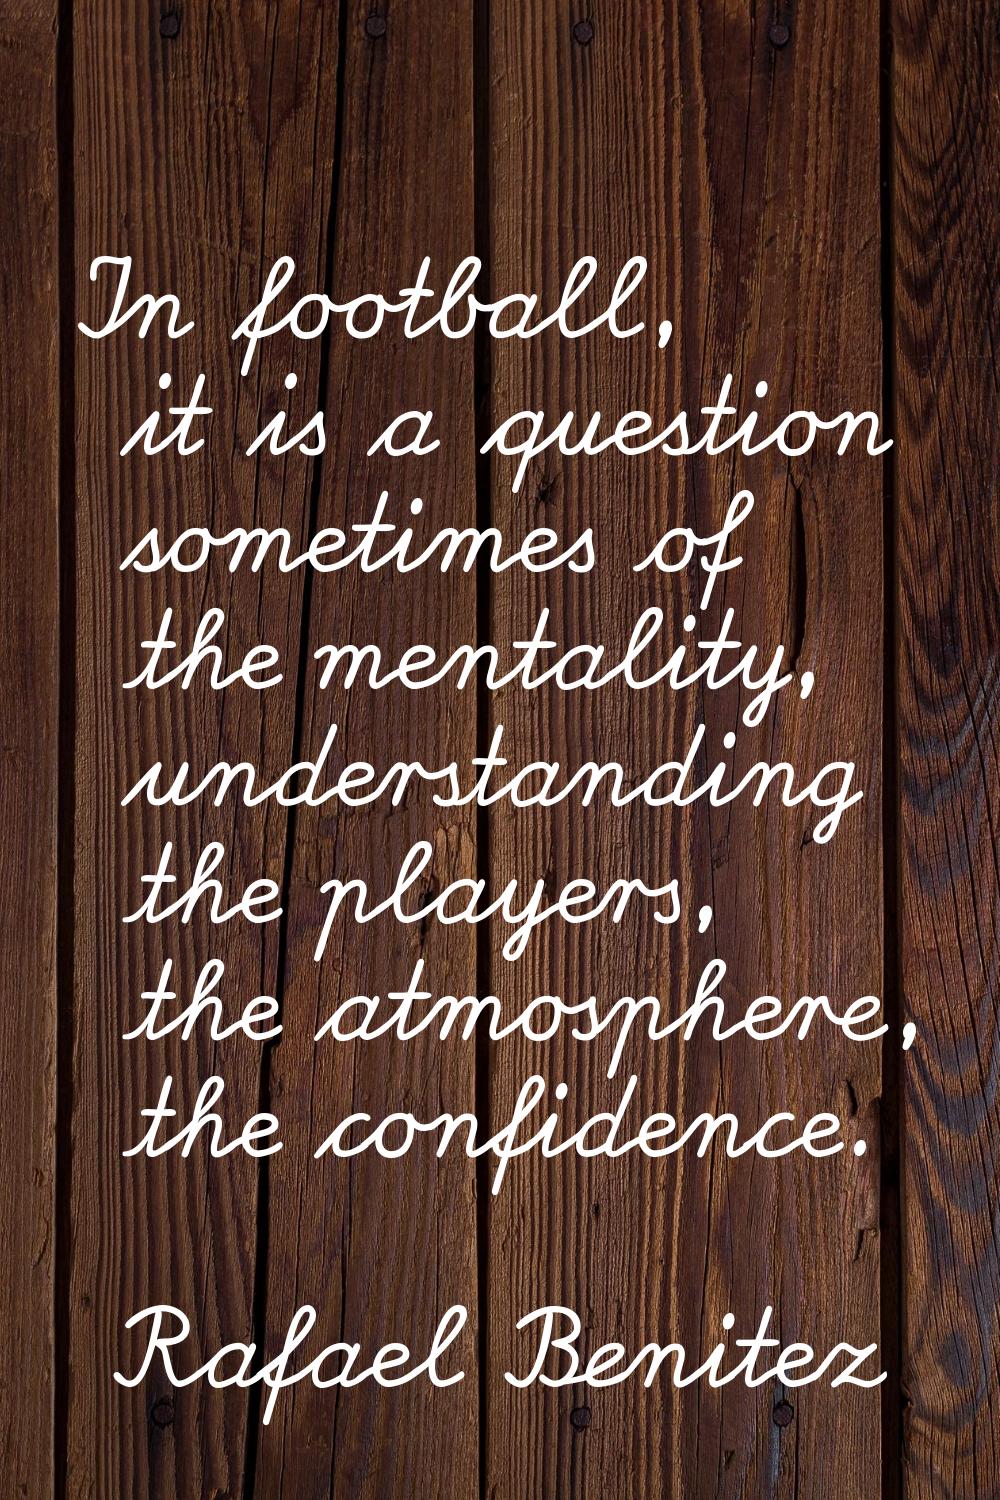 In football, it is a question sometimes of the mentality, understanding the players, the atmosphere